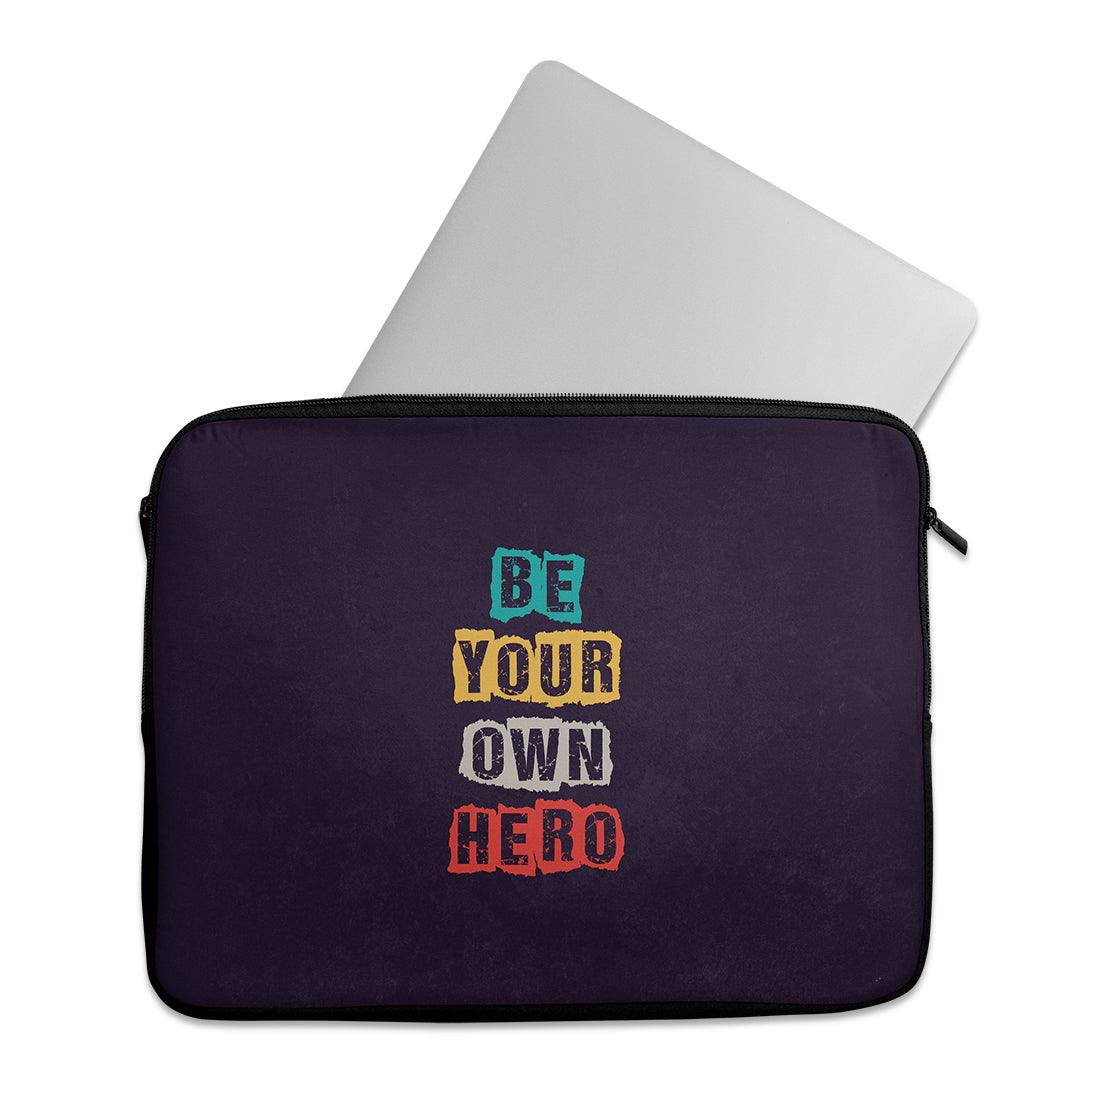 Laptop Sleeve Be Your own Hero